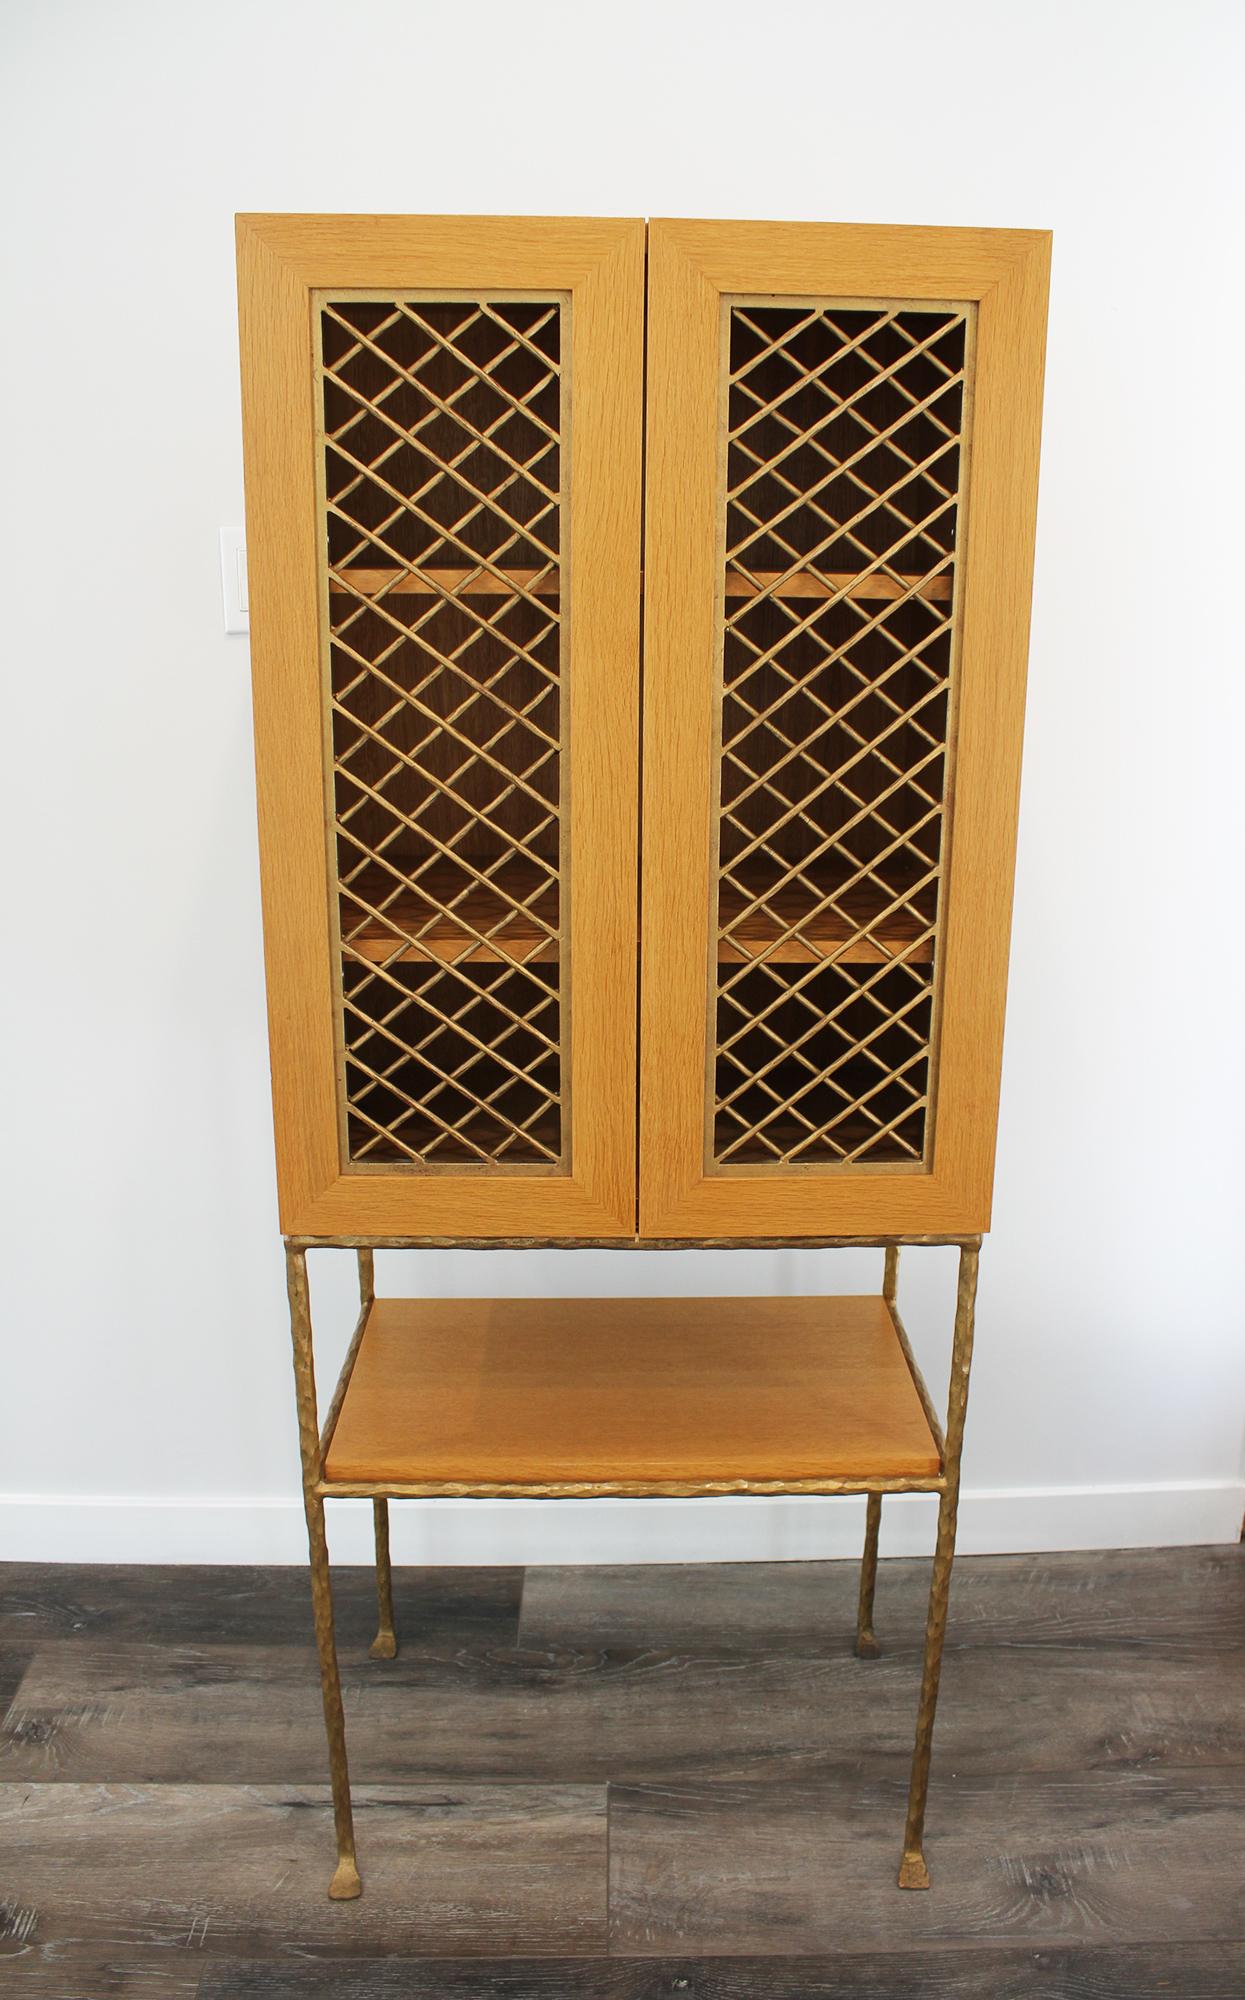 Garouste & Bonetti Cabinet, forged by Diego Giacometti's ironworker For Sale 5